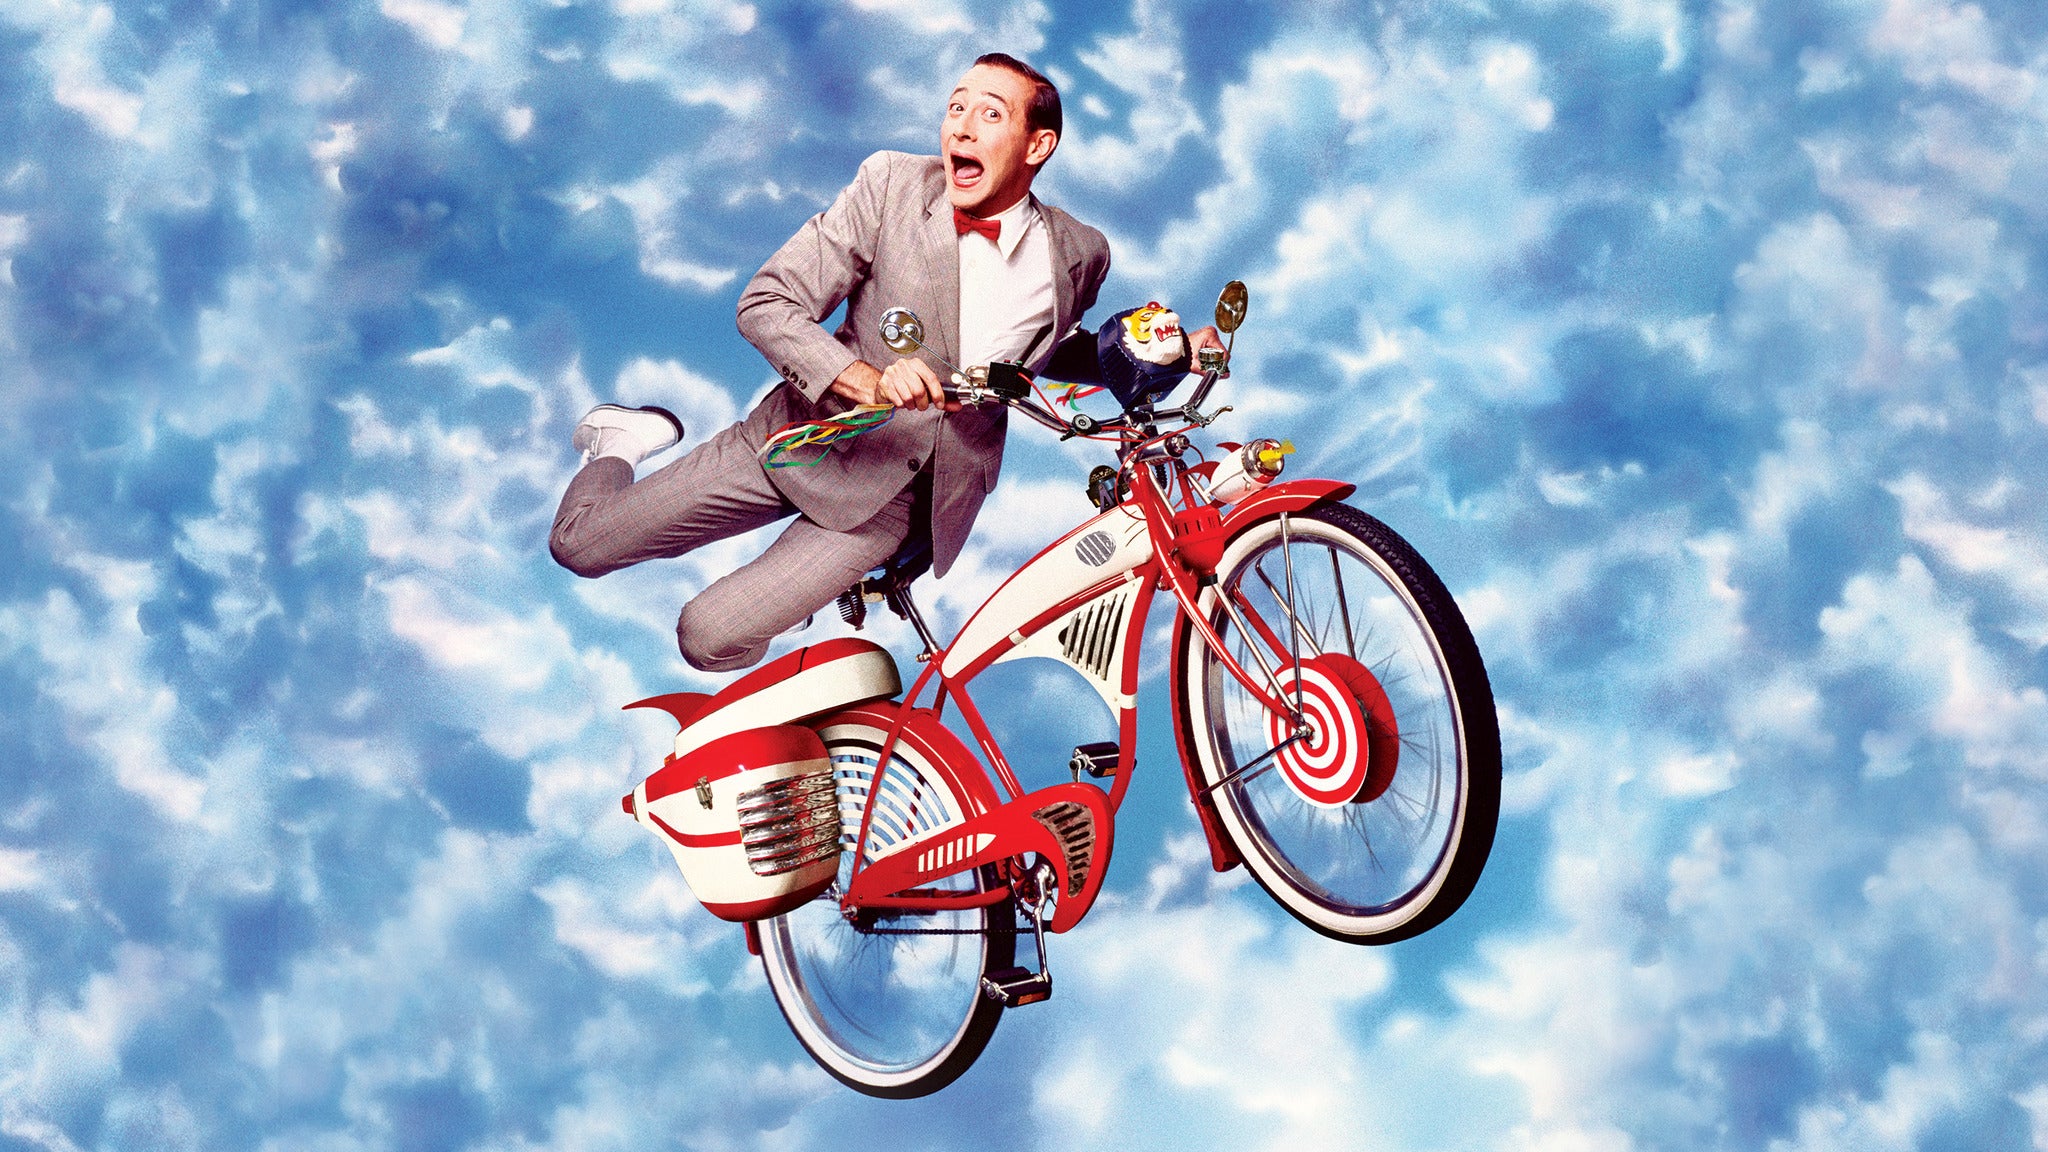 Pee-wee's Big Adventure 35th Anniversary Tour with Paul Reubens in Los Angeles promo photo for VIP Package presale offer code